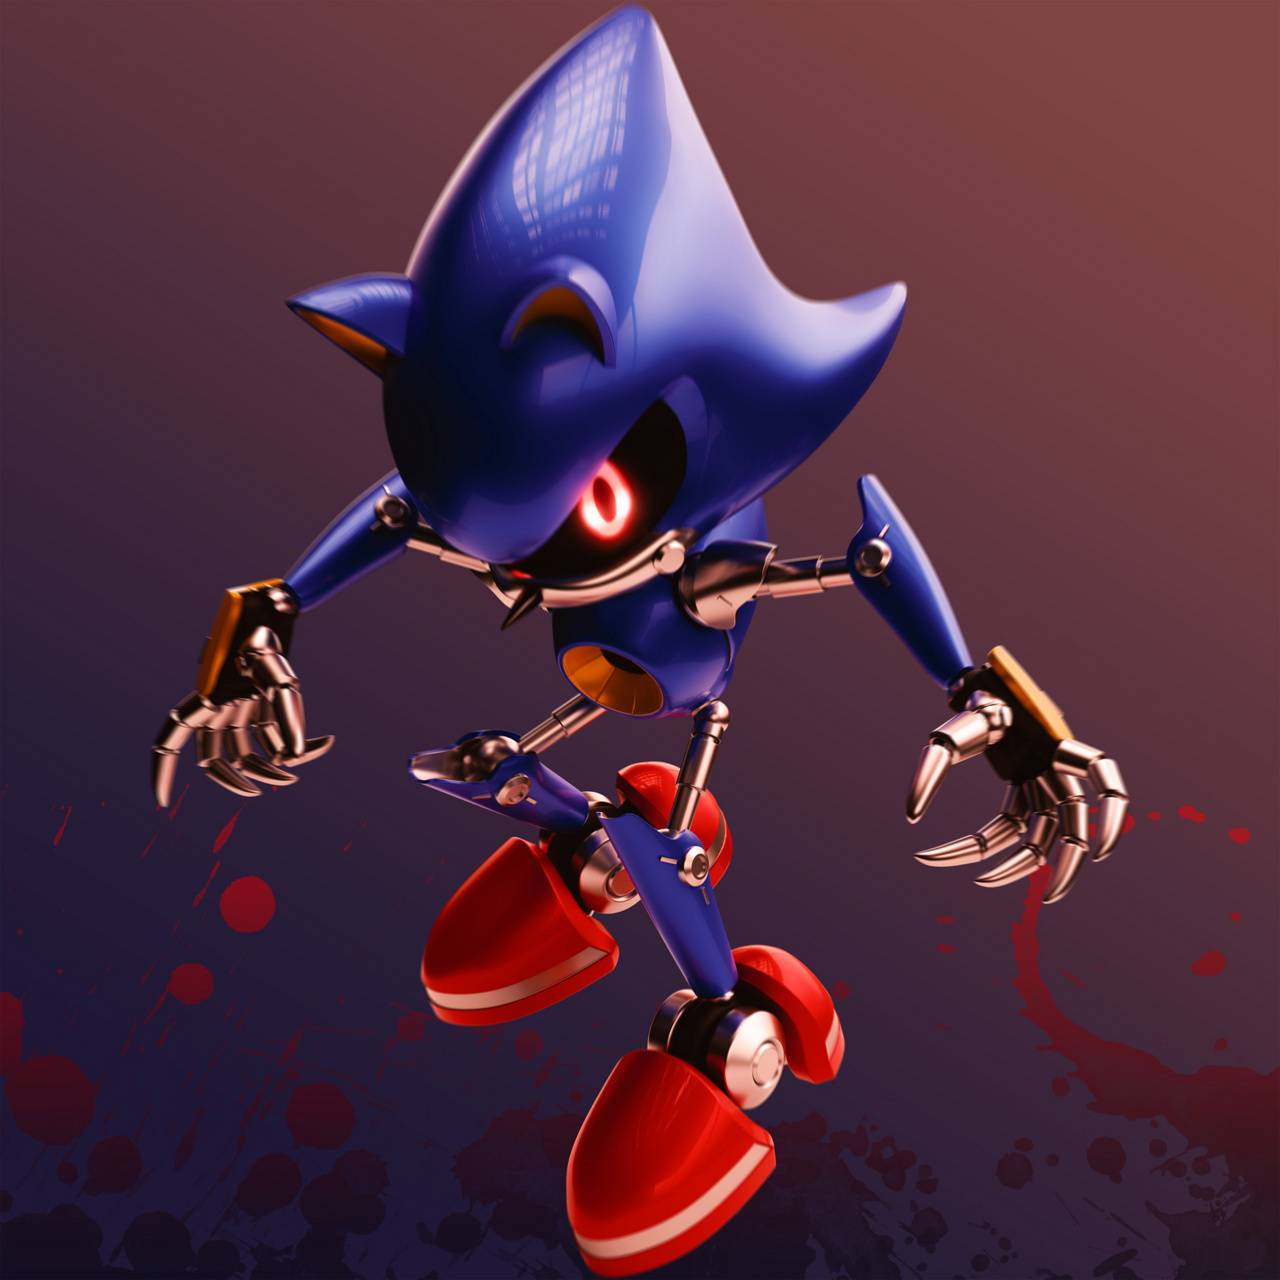 760 Sonic HD Wallpapers and Backgrounds